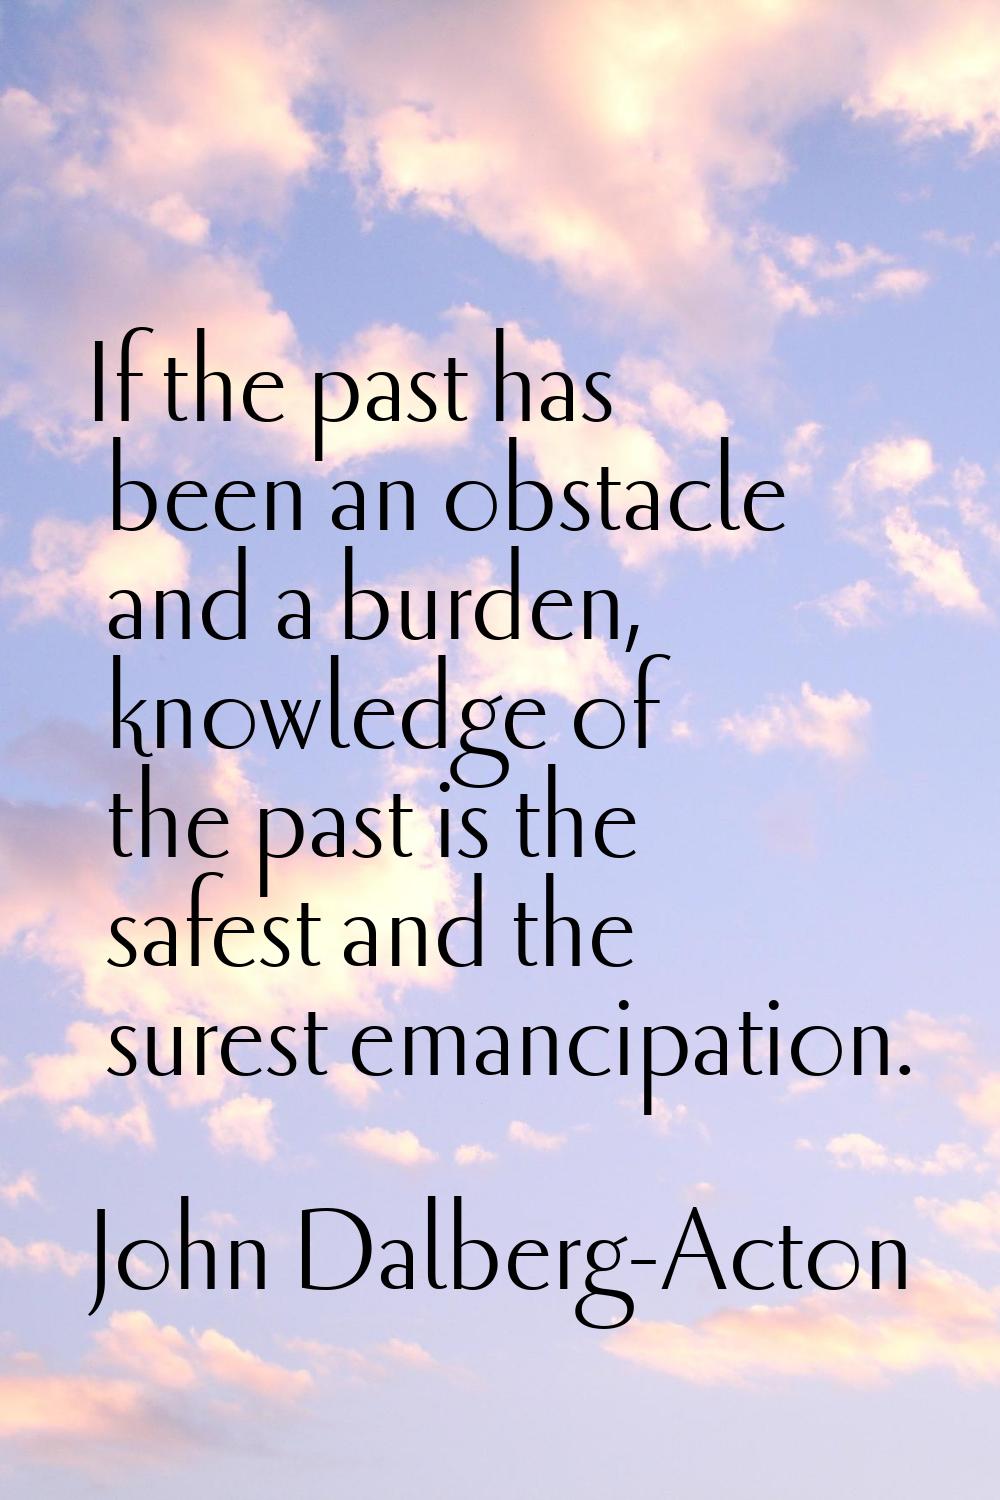 If the past has been an obstacle and a burden, knowledge of the past is the safest and the surest e